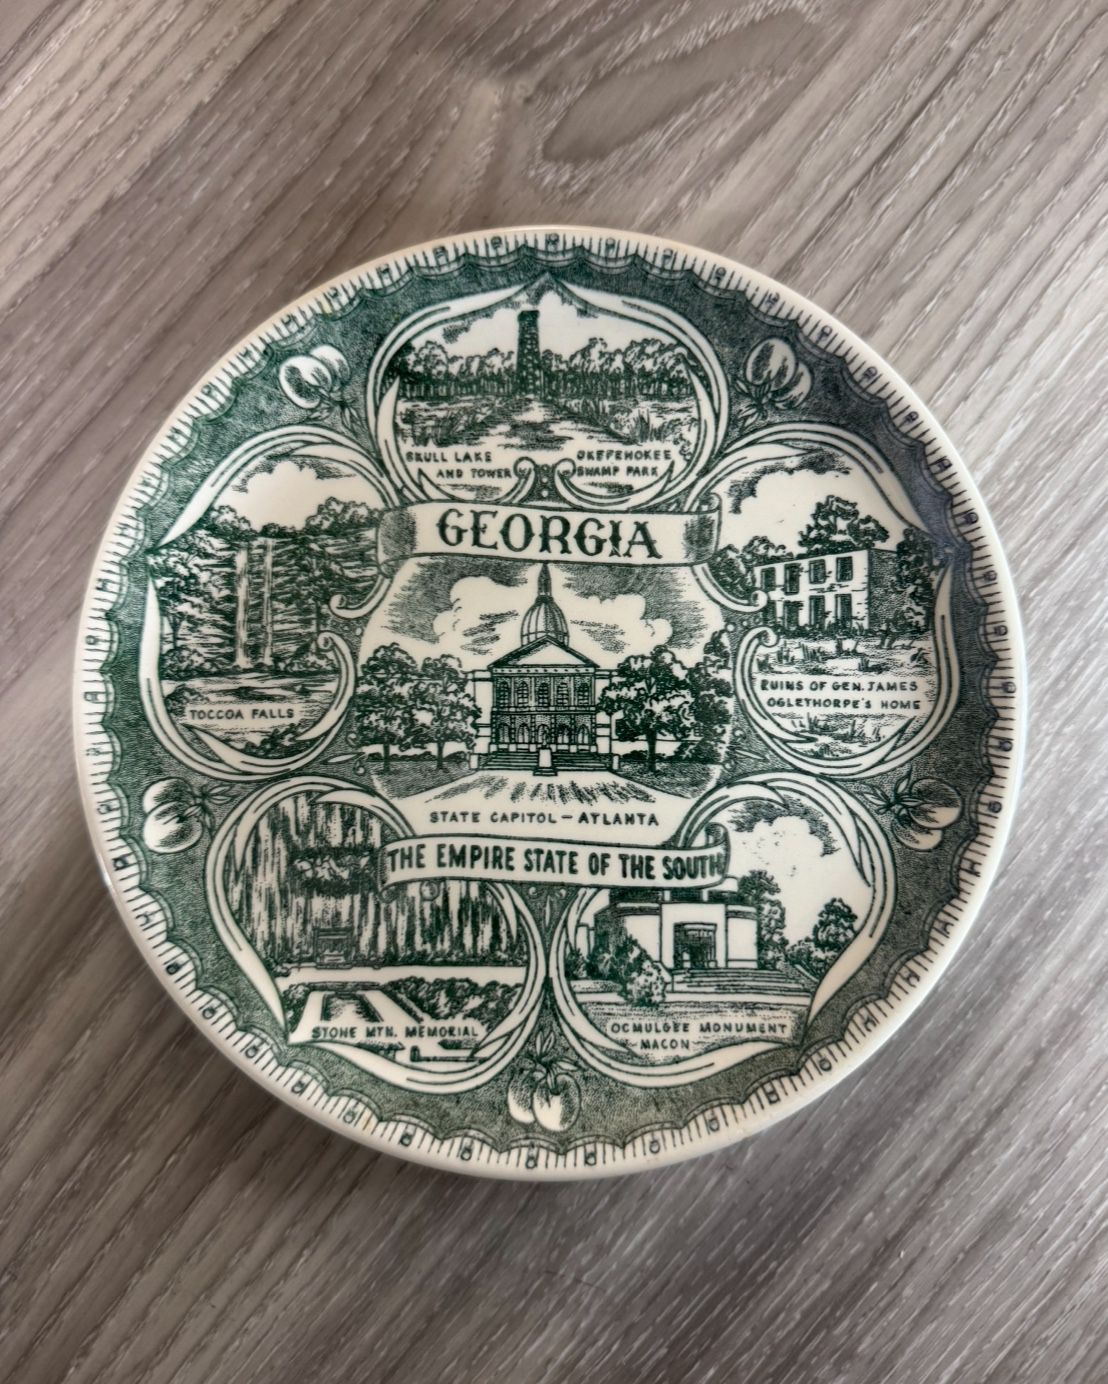 Vintage Georgia Empire State of the South Collectible Ceramic Plate (7 1/4")